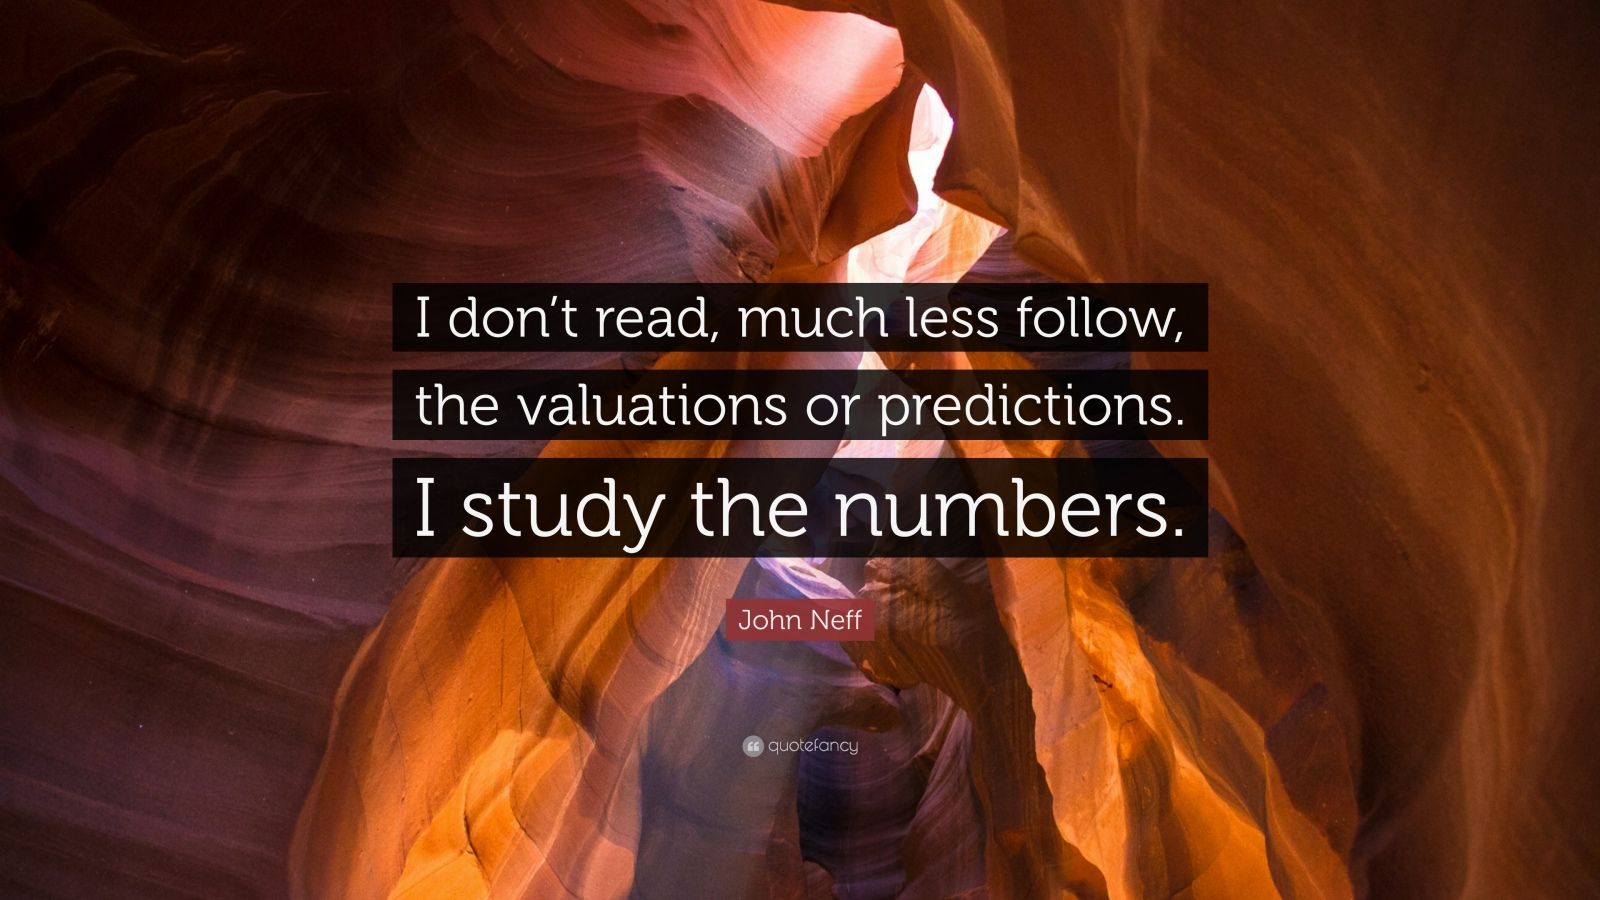 John Neff Quote: “I don’t read, much less follow, the valuations or predictions. I study the numbers.”